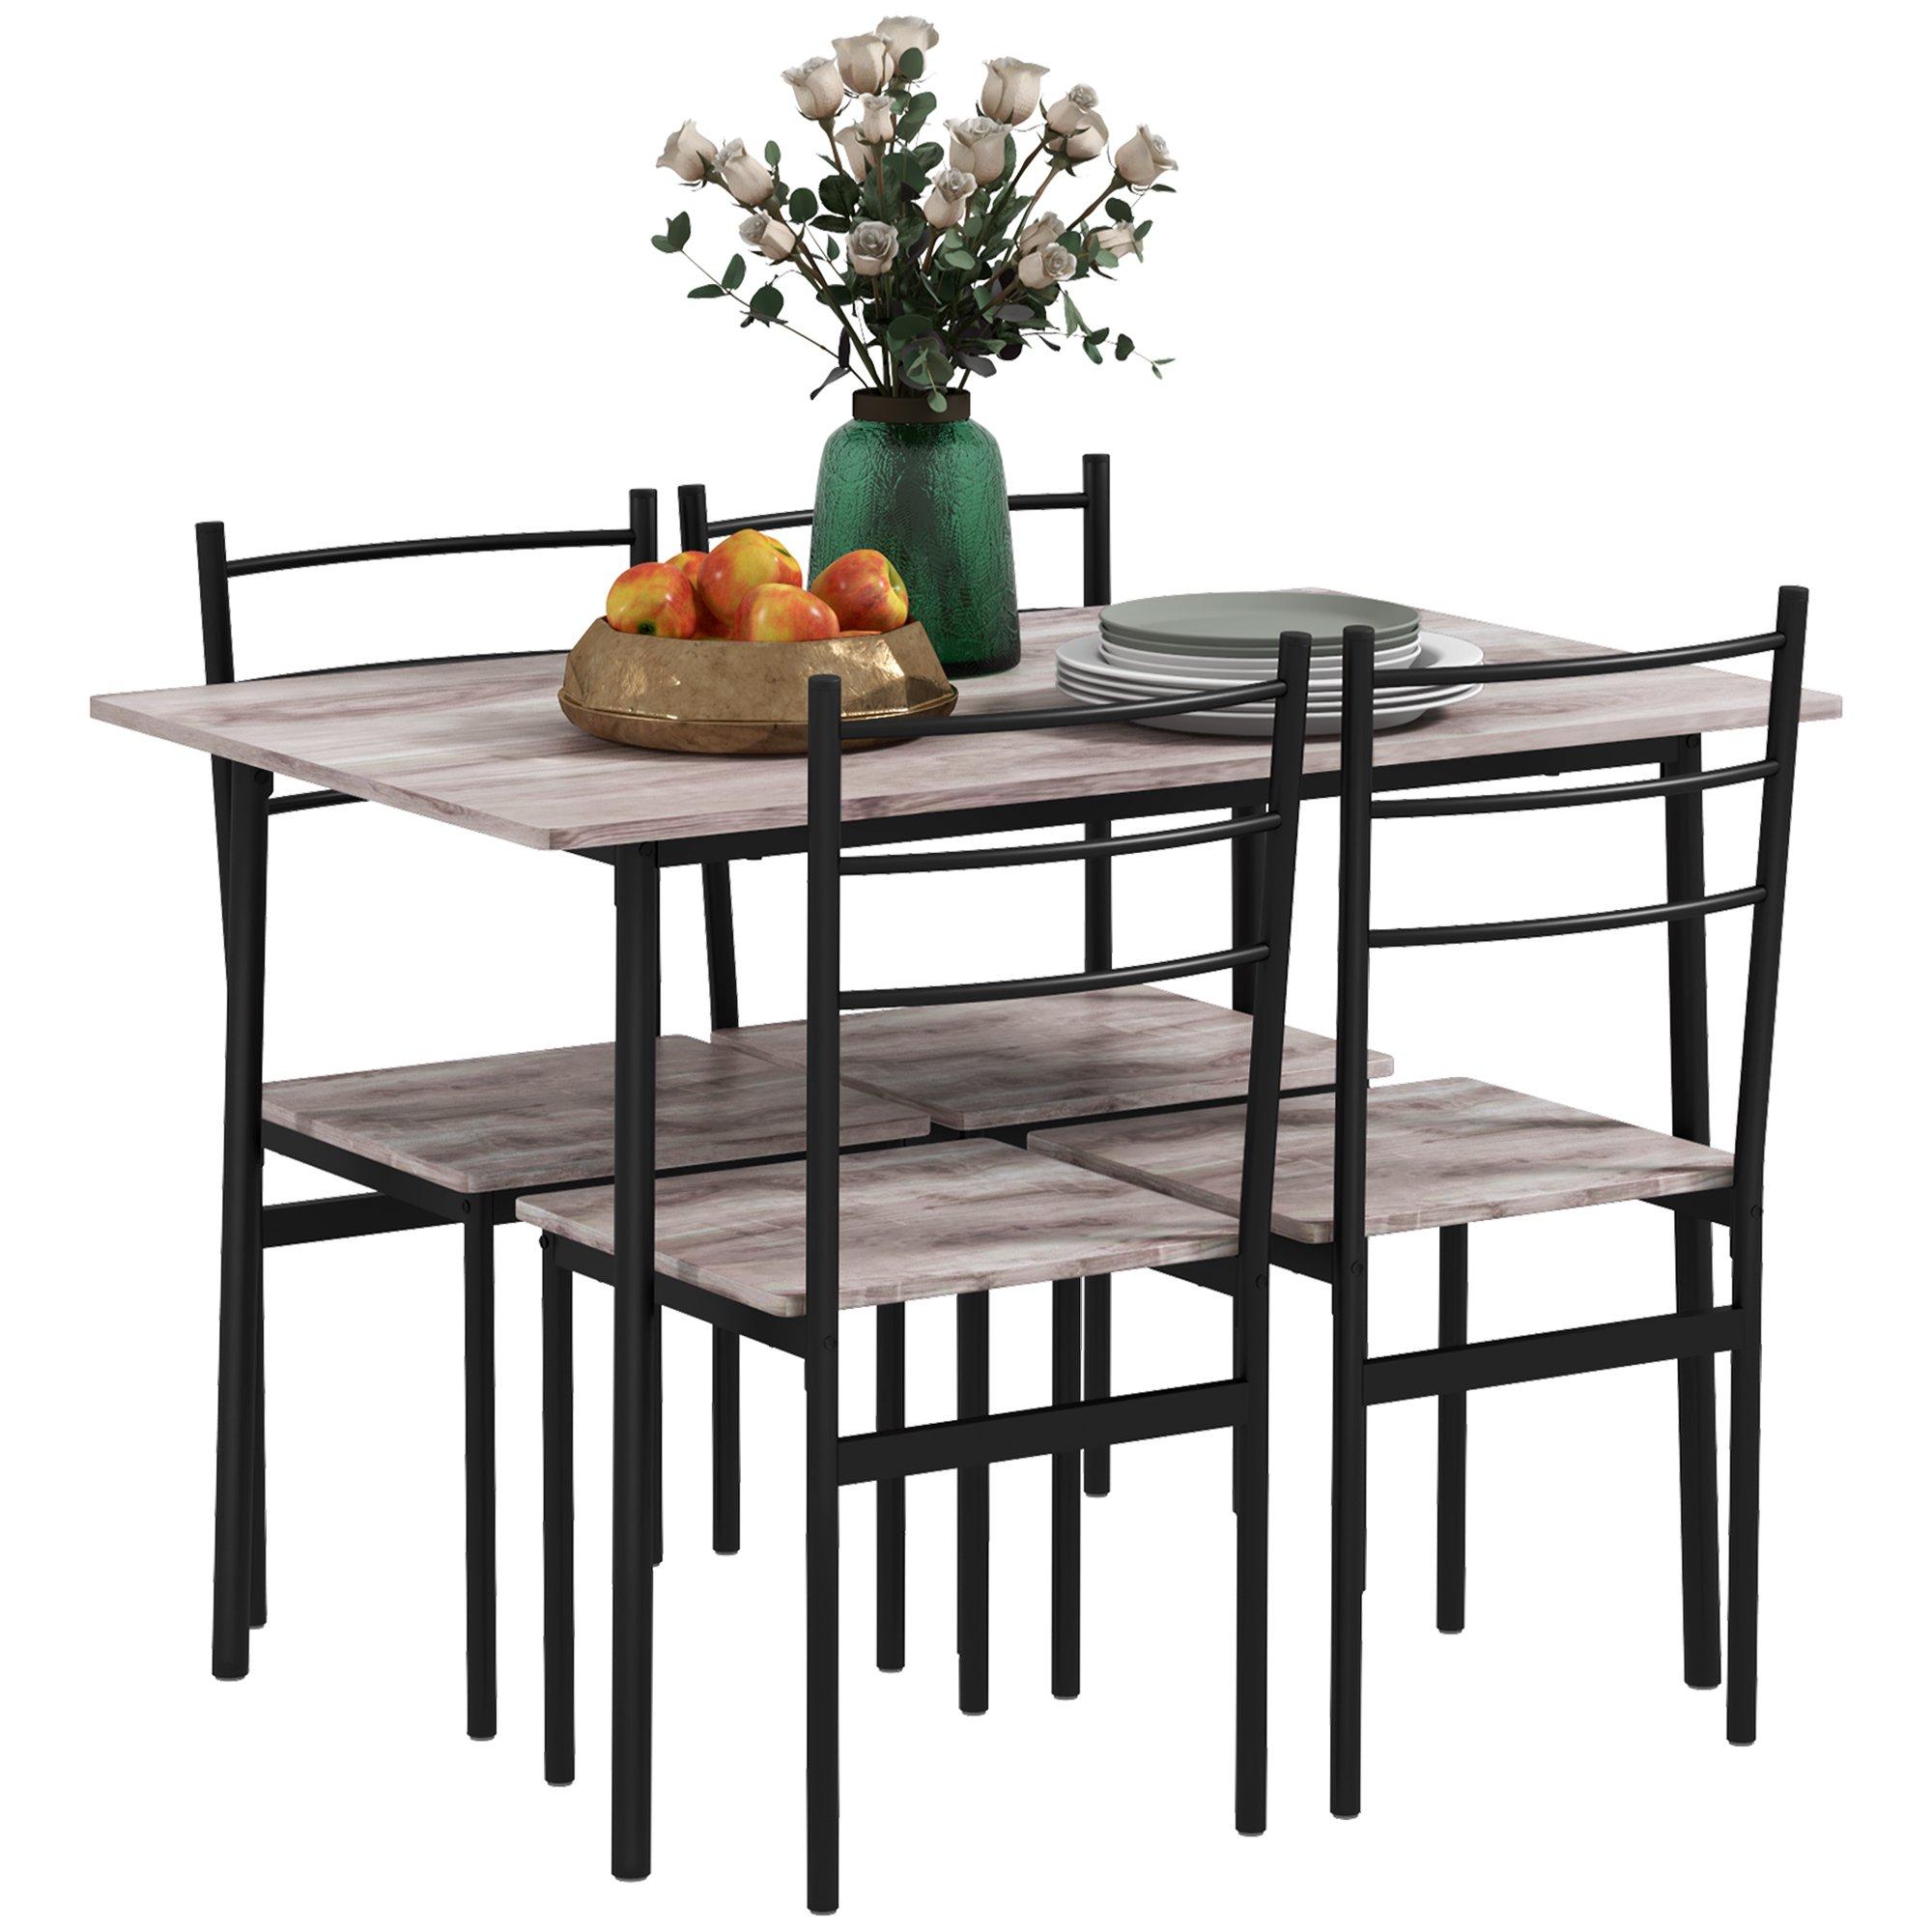 5pc Dining Room Sets, Space Saving Dining Table and 4 Chairs, Steel Frame Brown